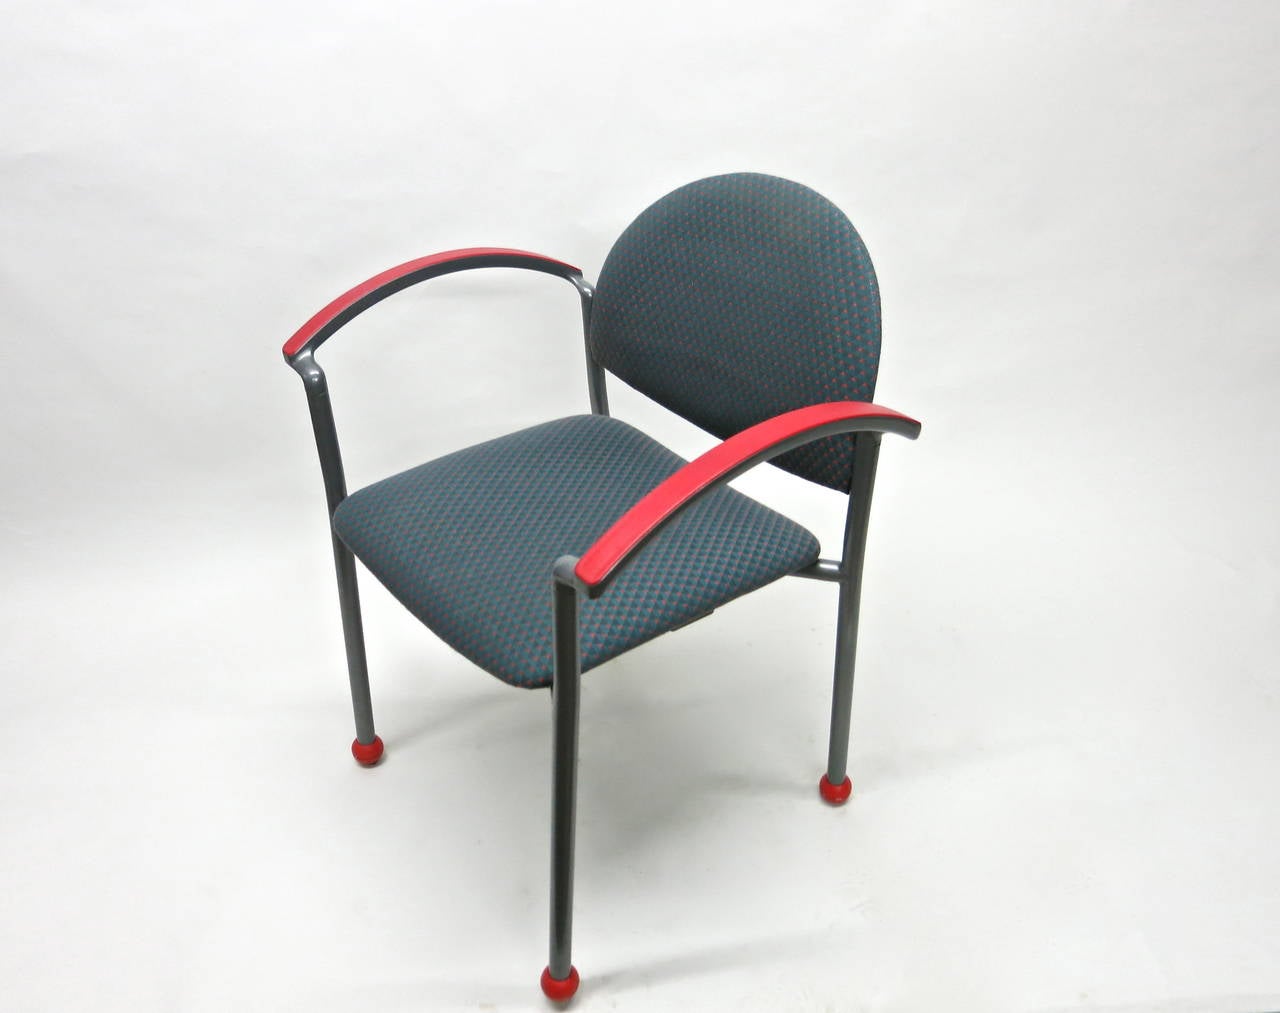 fixtures furniture bola chair